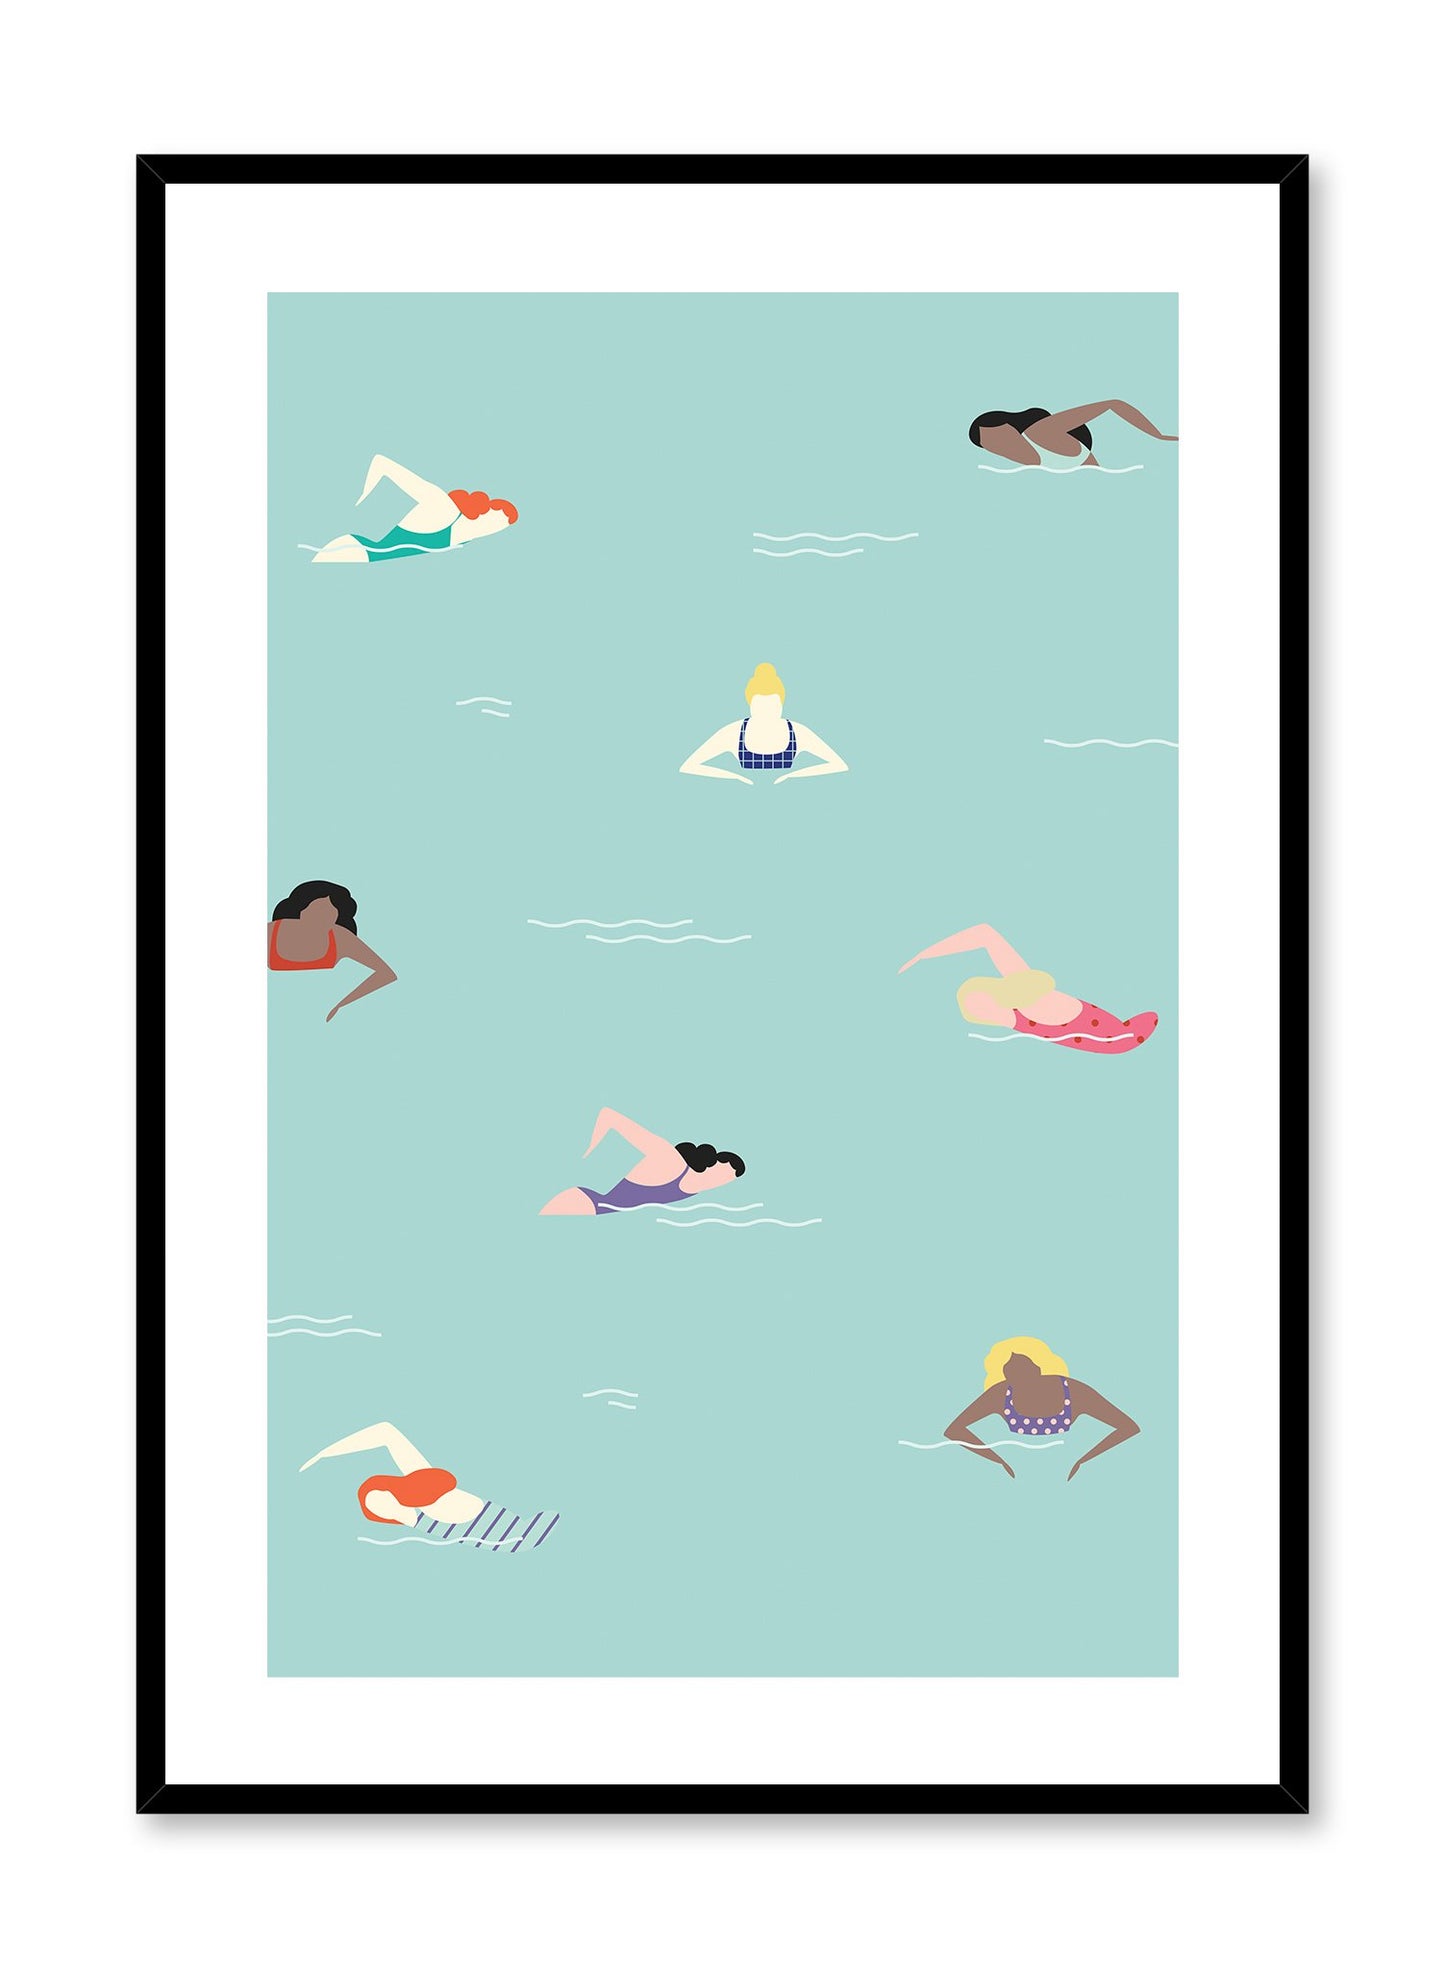 Just Keep Swimming is a retro illustration poster of swimming women by Opposite Wall.